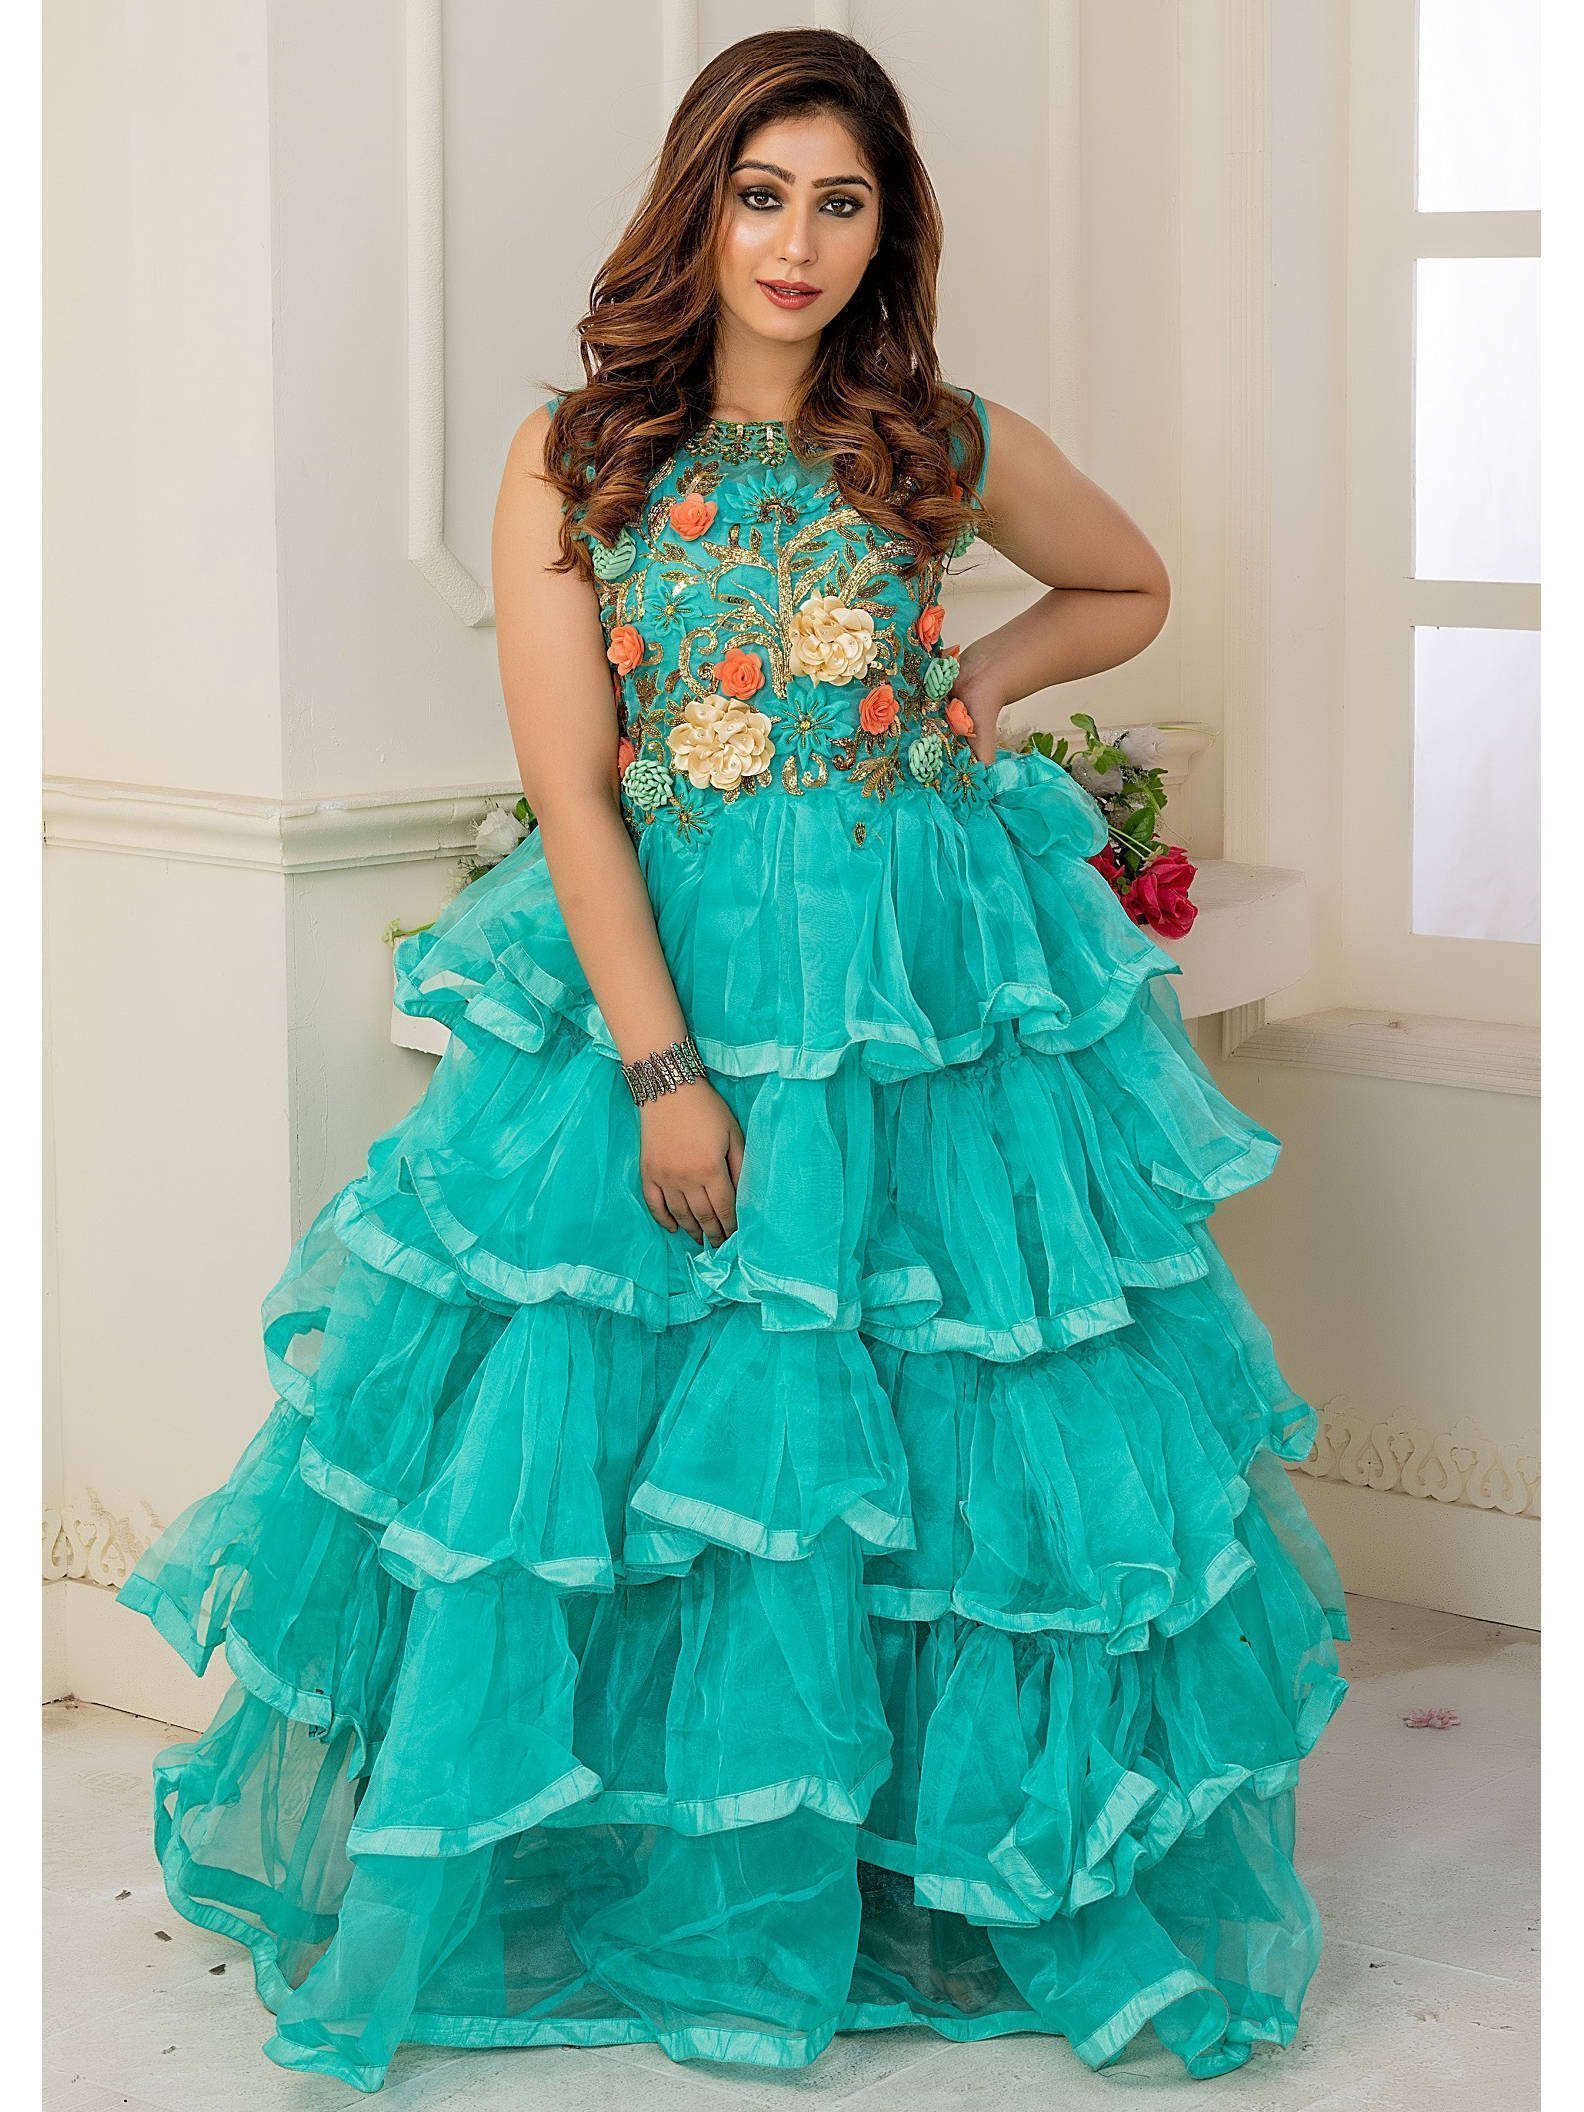 ruffle gown designs